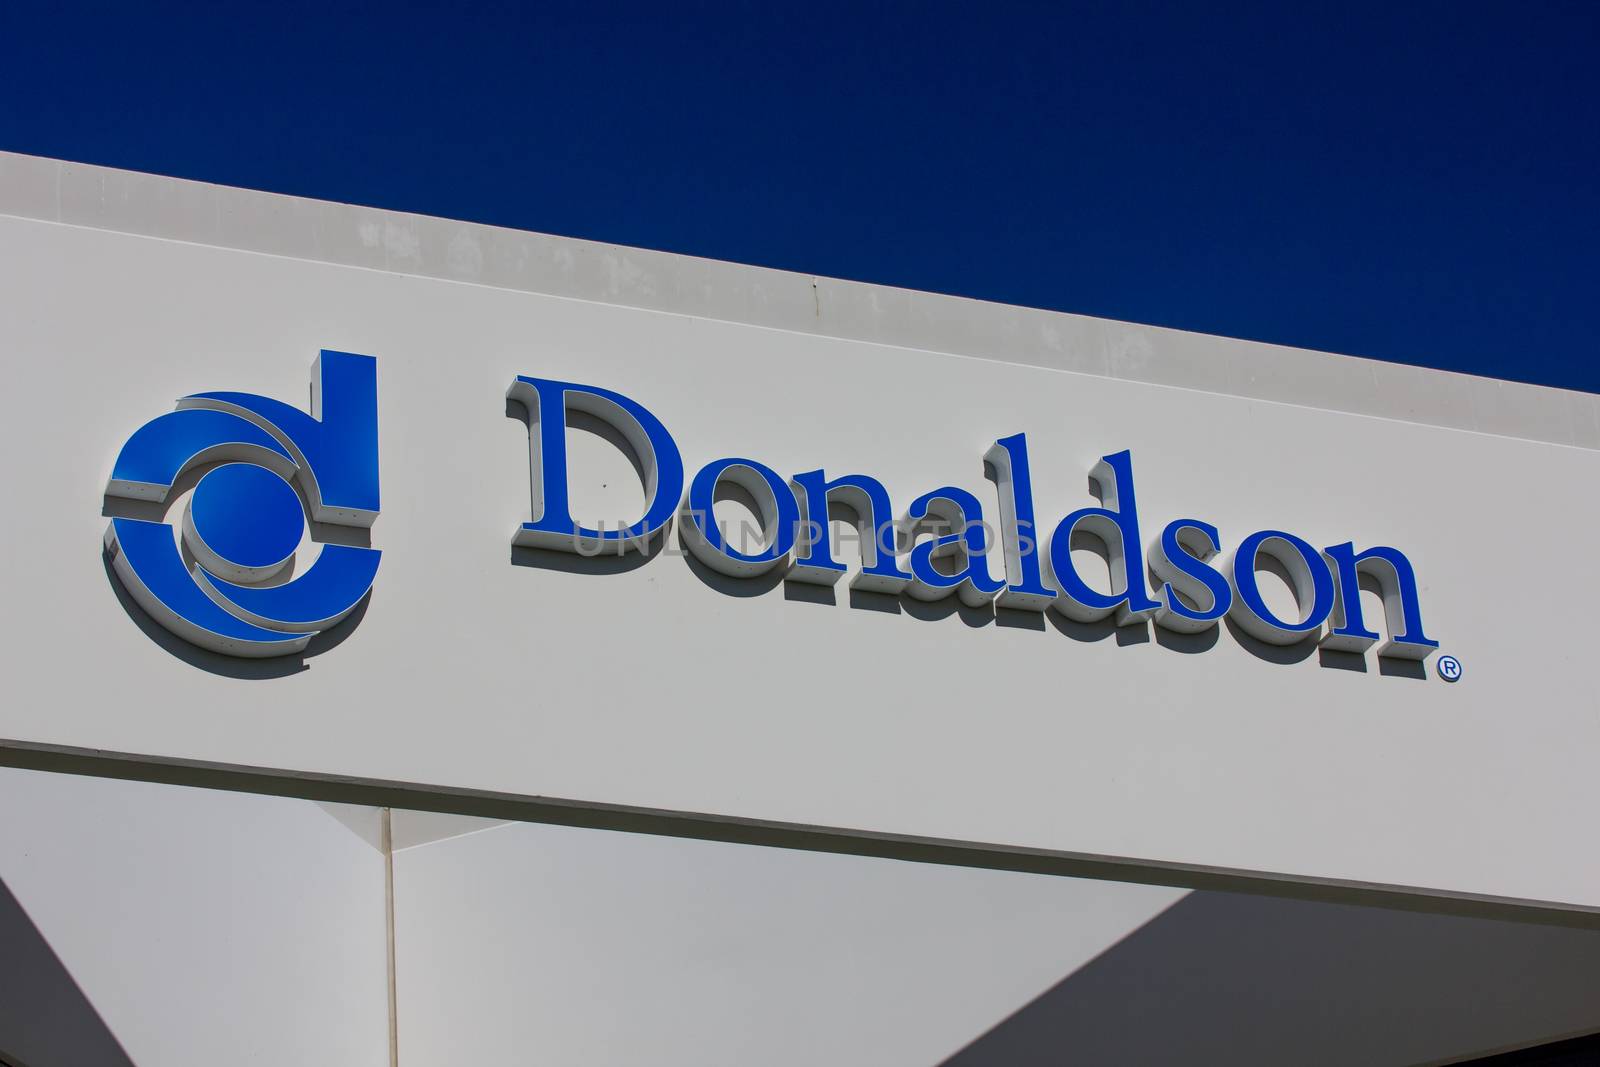 Donaldson Company Exterior and Logo by wolterk